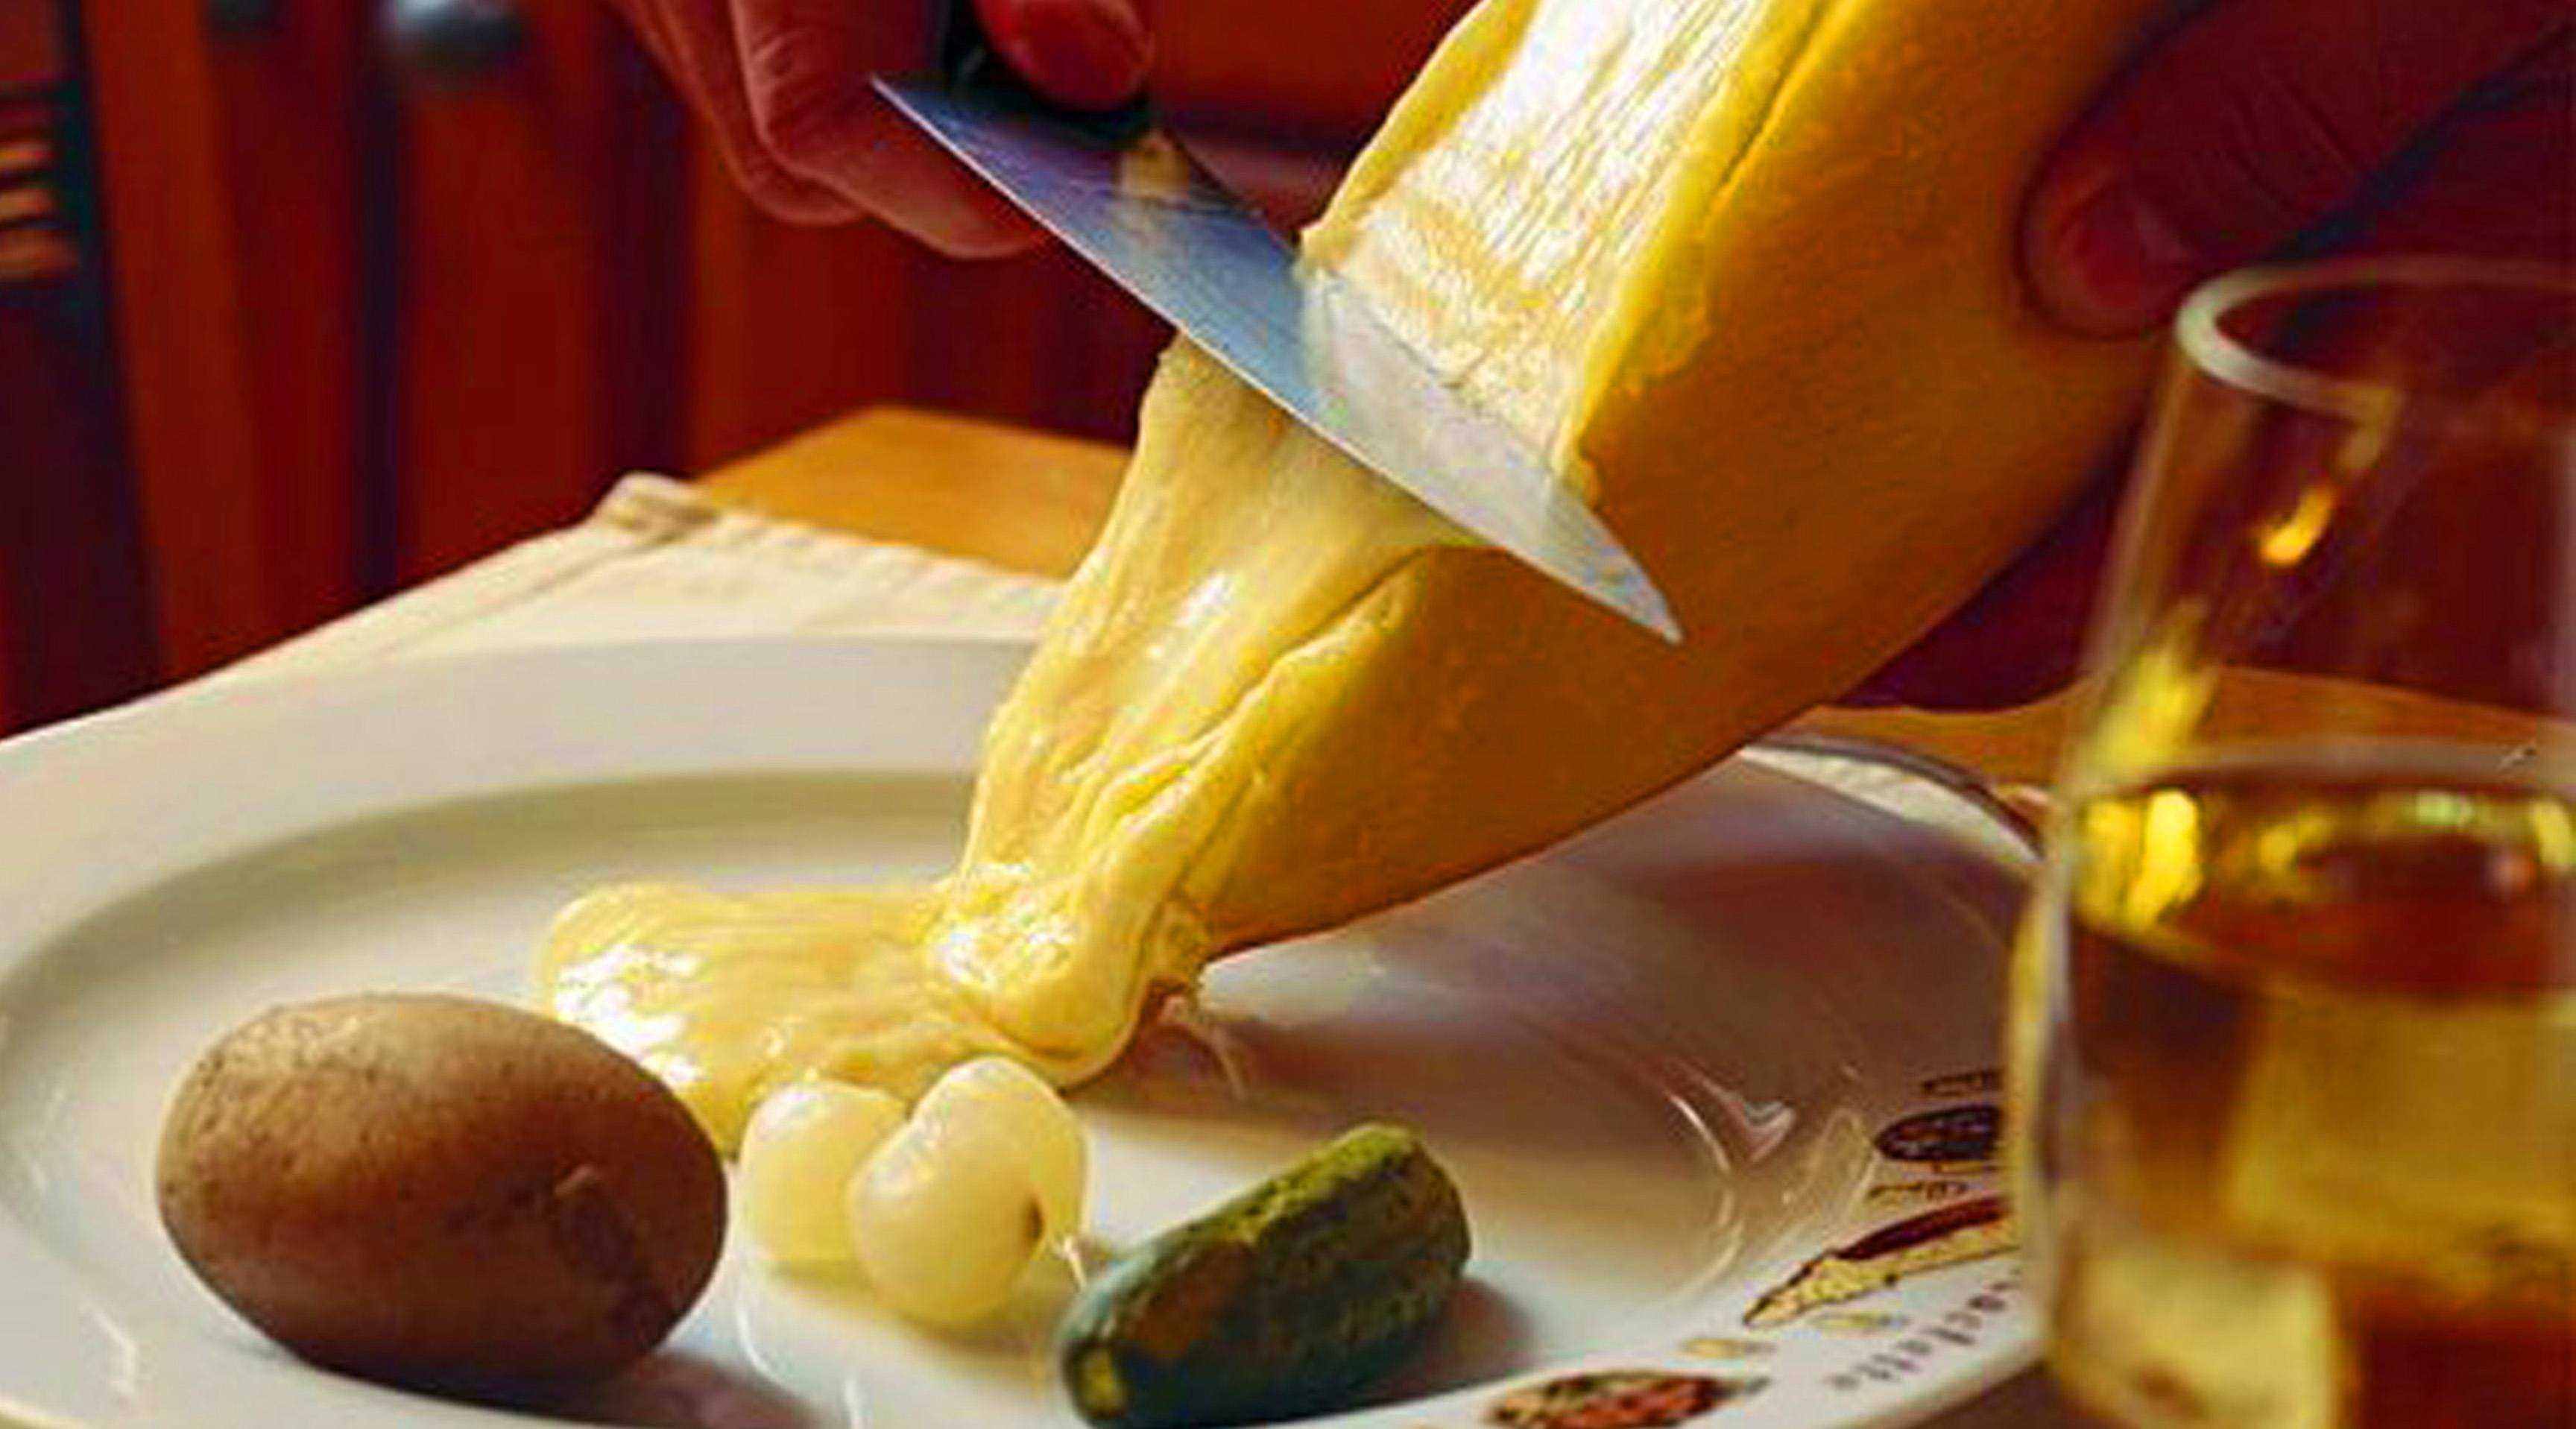 raclette scraped melted cheese